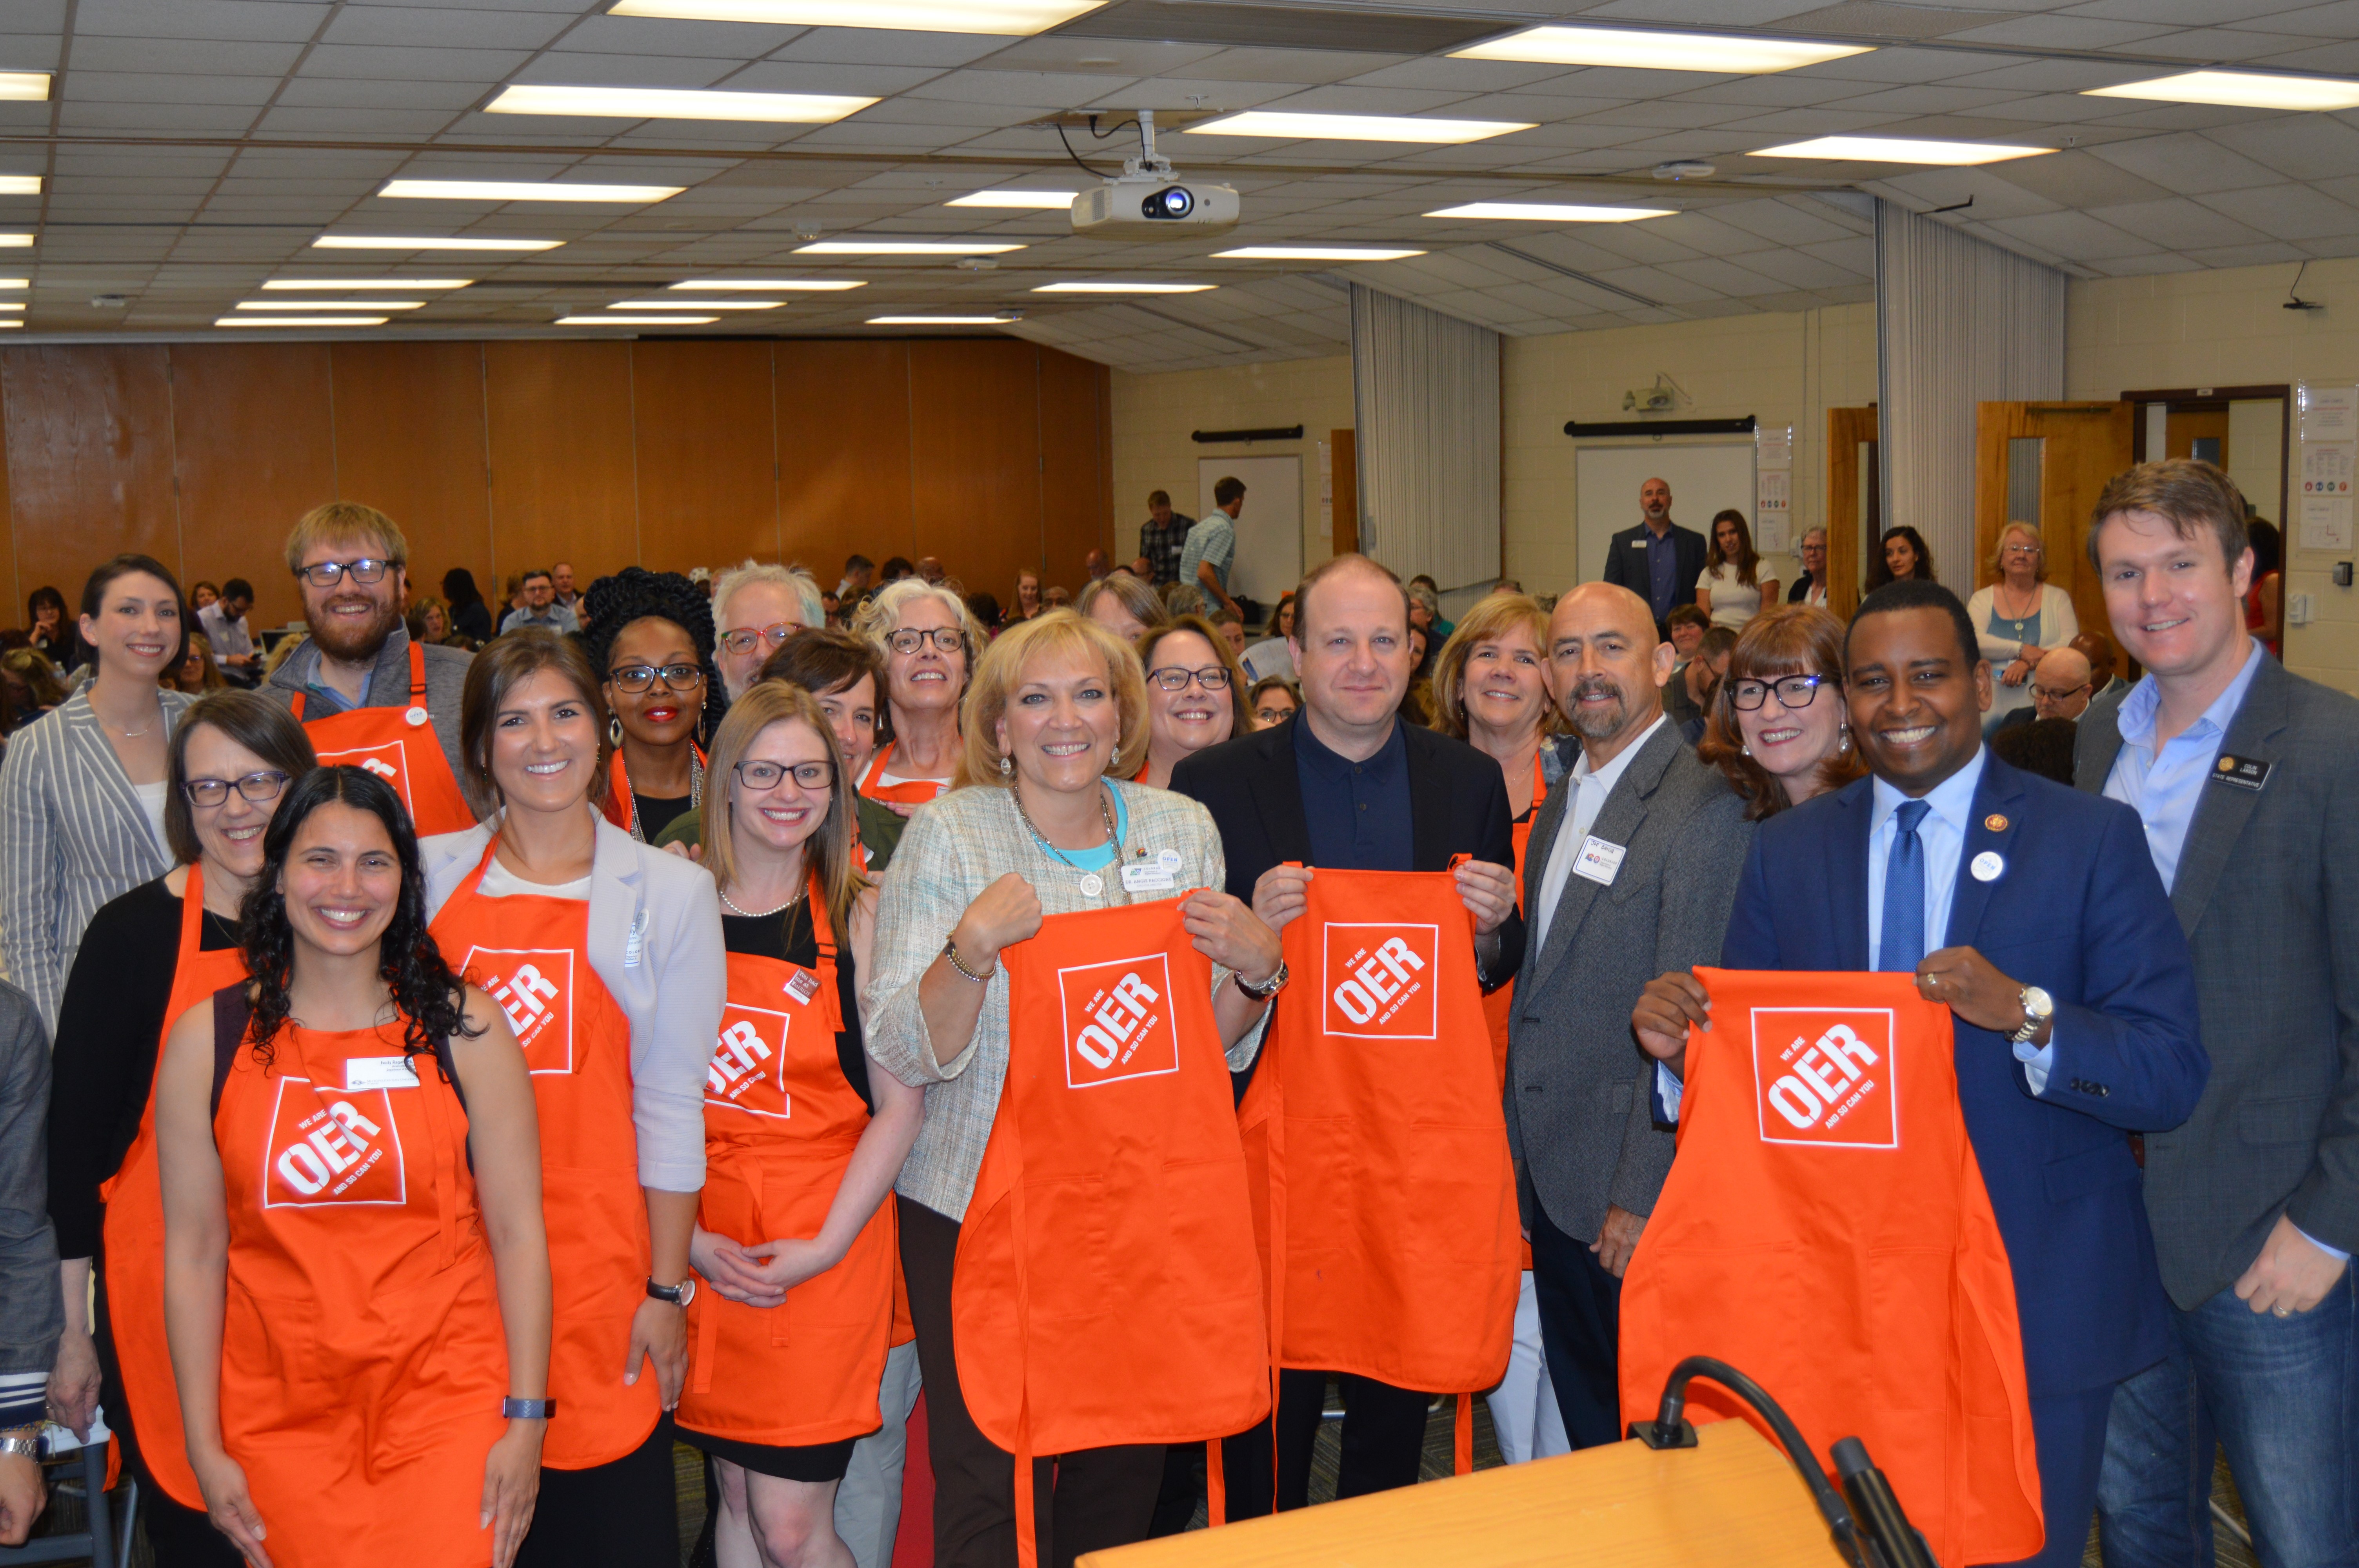 Attendees at a conference pose for a photo holding aprons that read "OER"